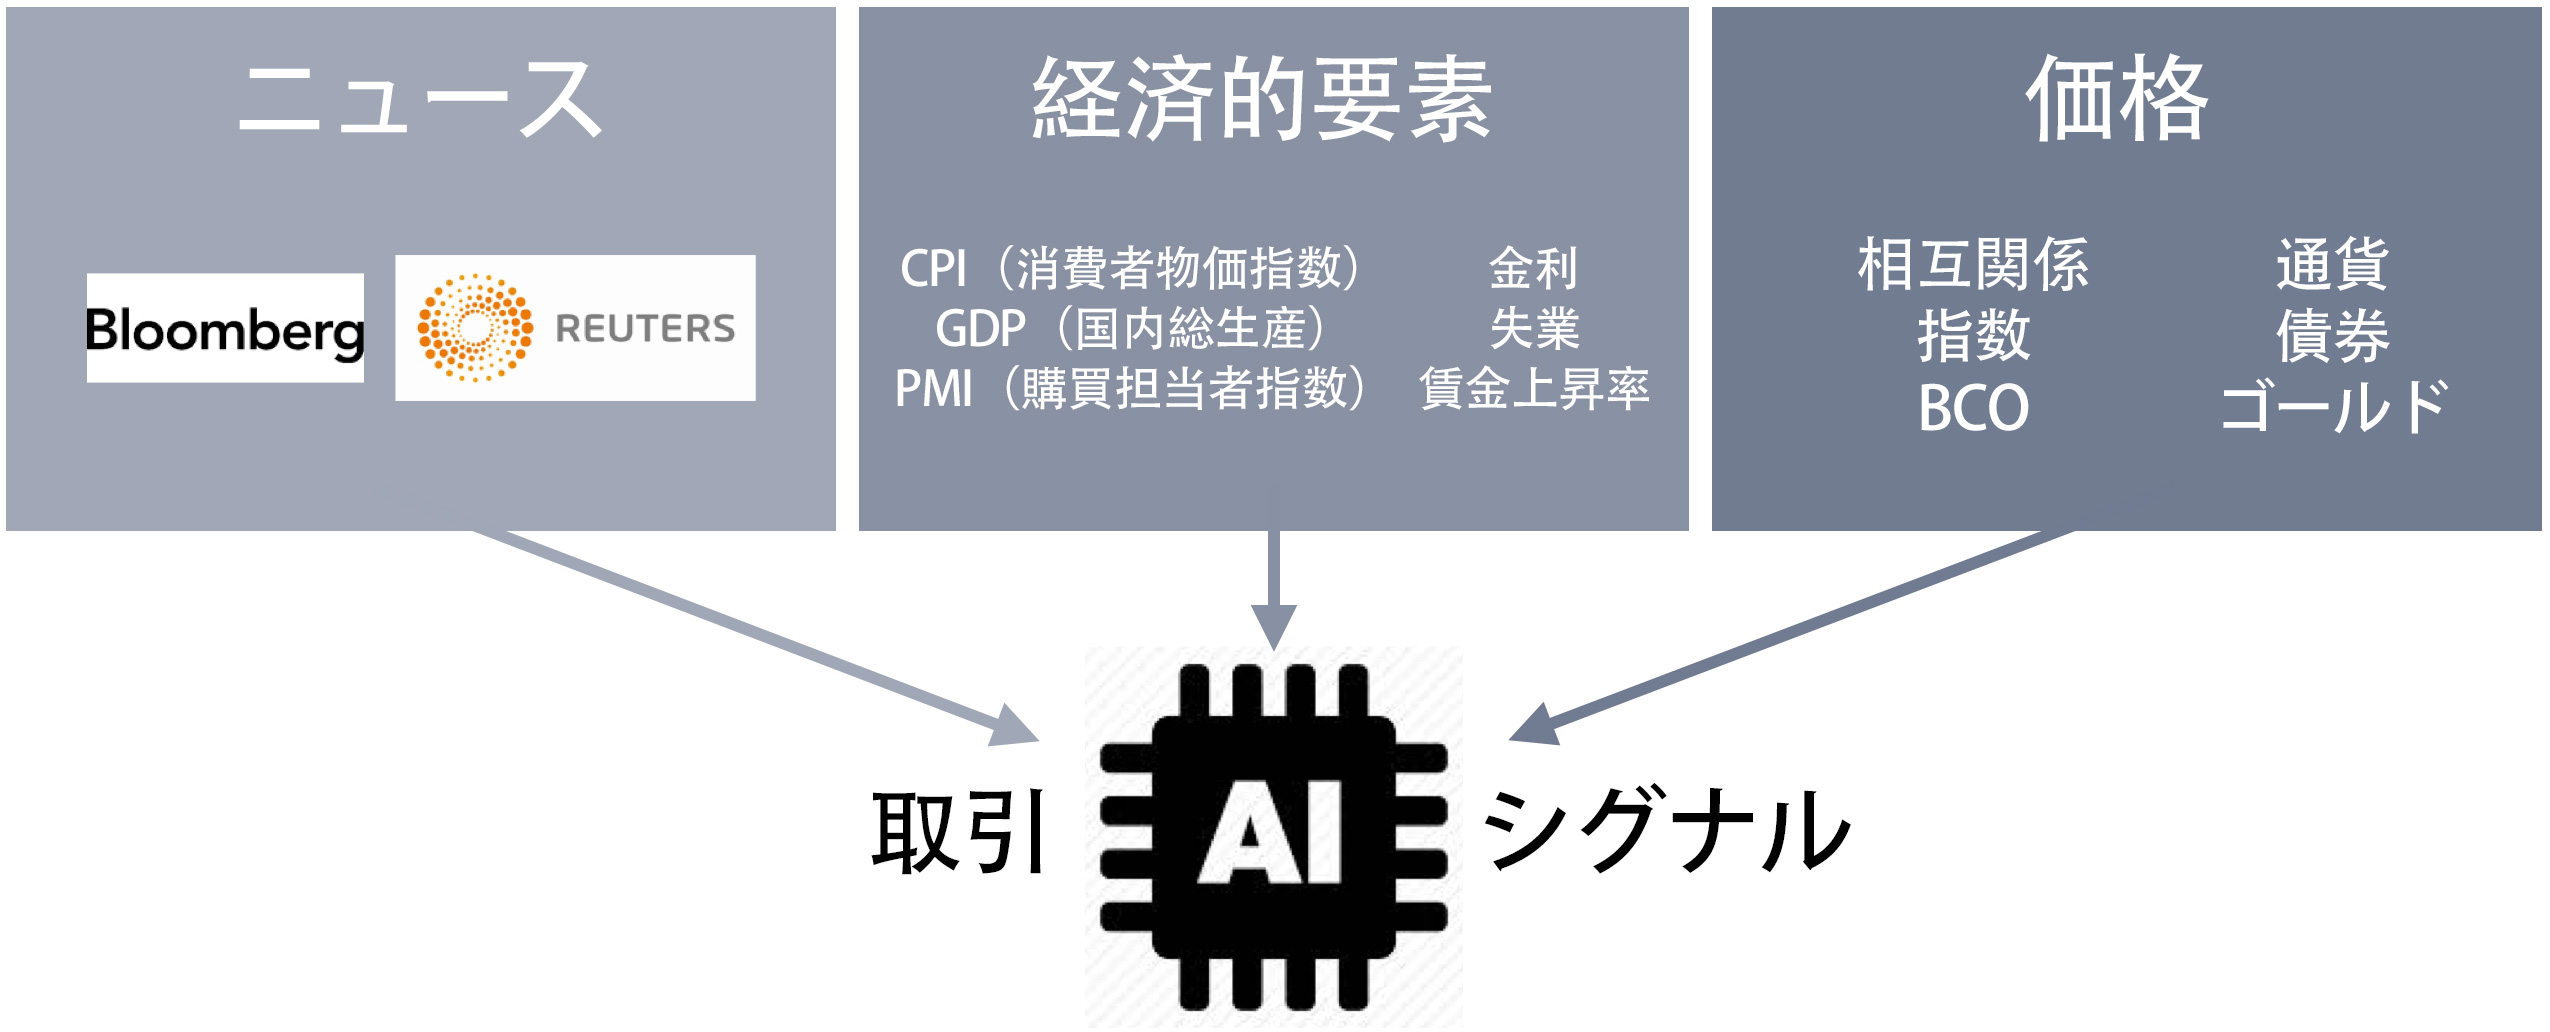 cp-global-artificial-intelligence-trading-signal-japanese